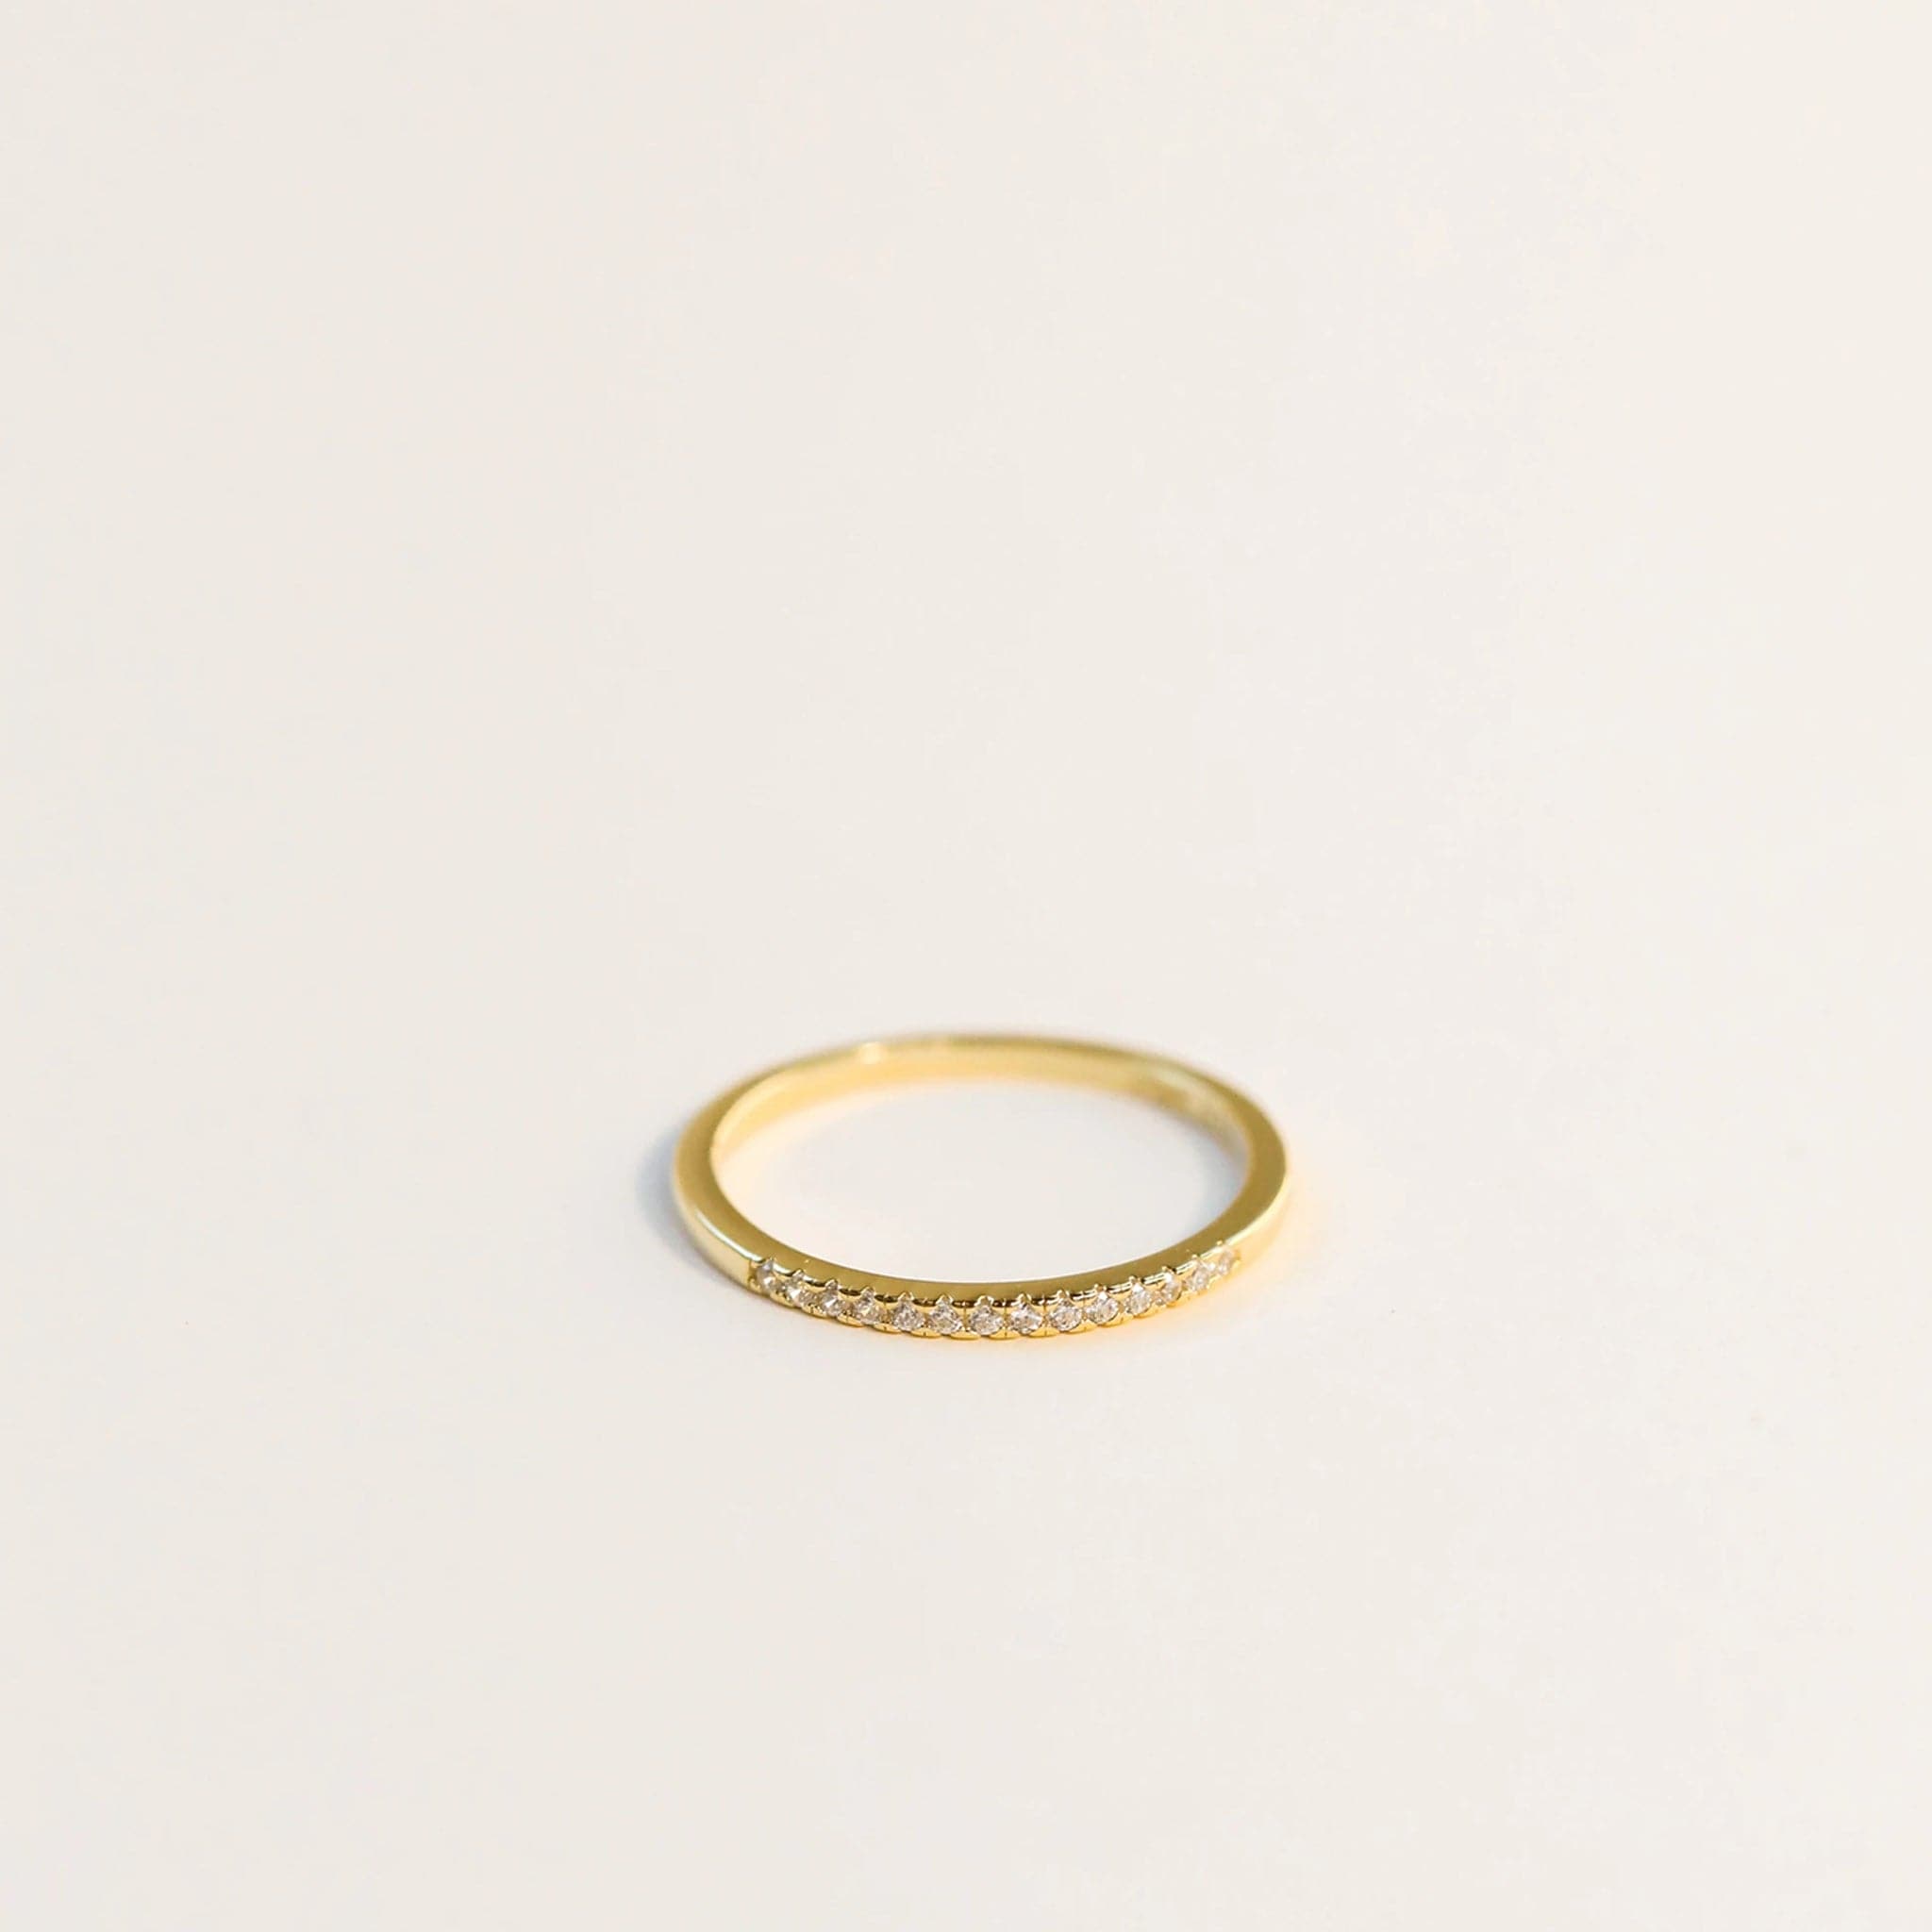 A delicate gold ring with a half pave design. This ring's band is thin, which is perfect for stacking.